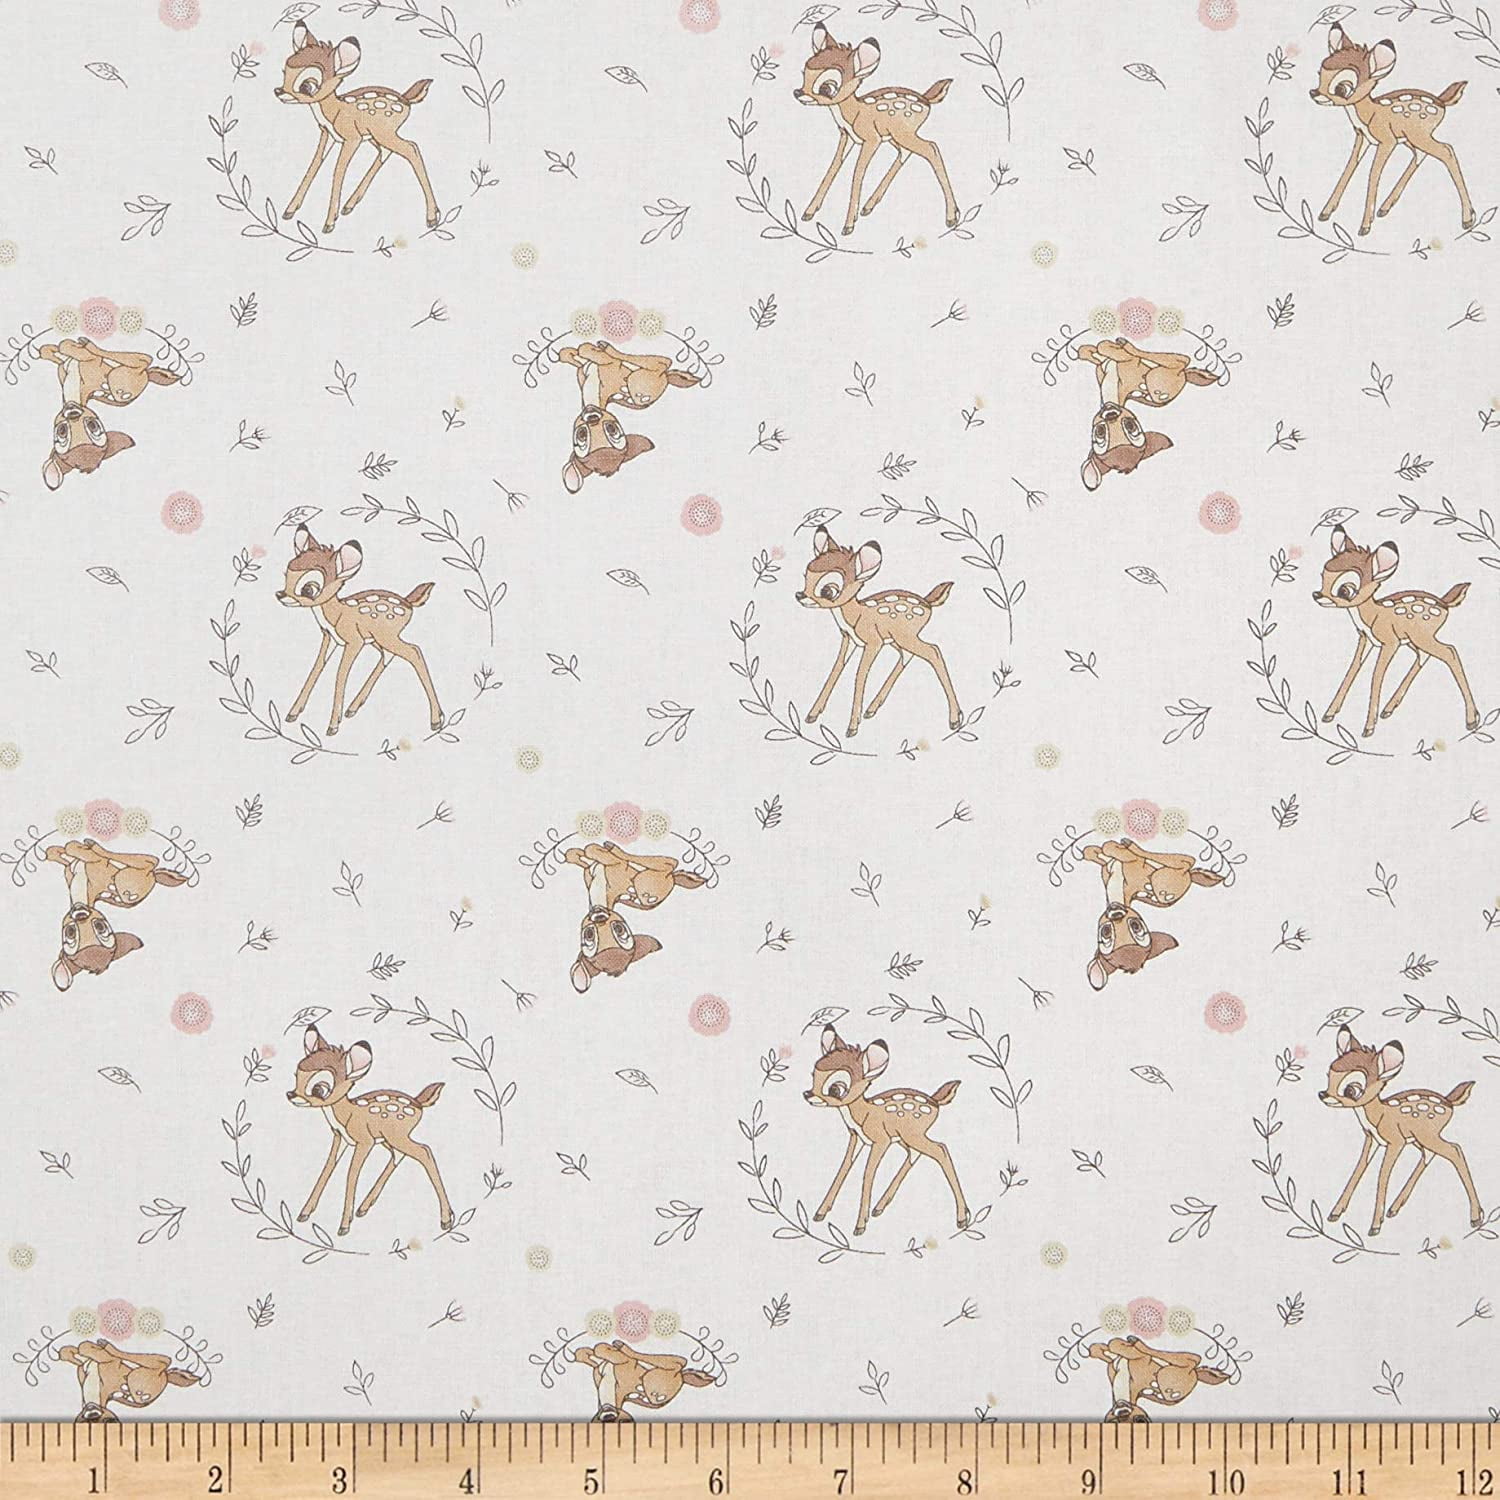 Sweet Bambi 100% cotton fabric by the yard Springs Creative Bambi Disney cotton Fabric beige blue white Swaddling blanket fabric